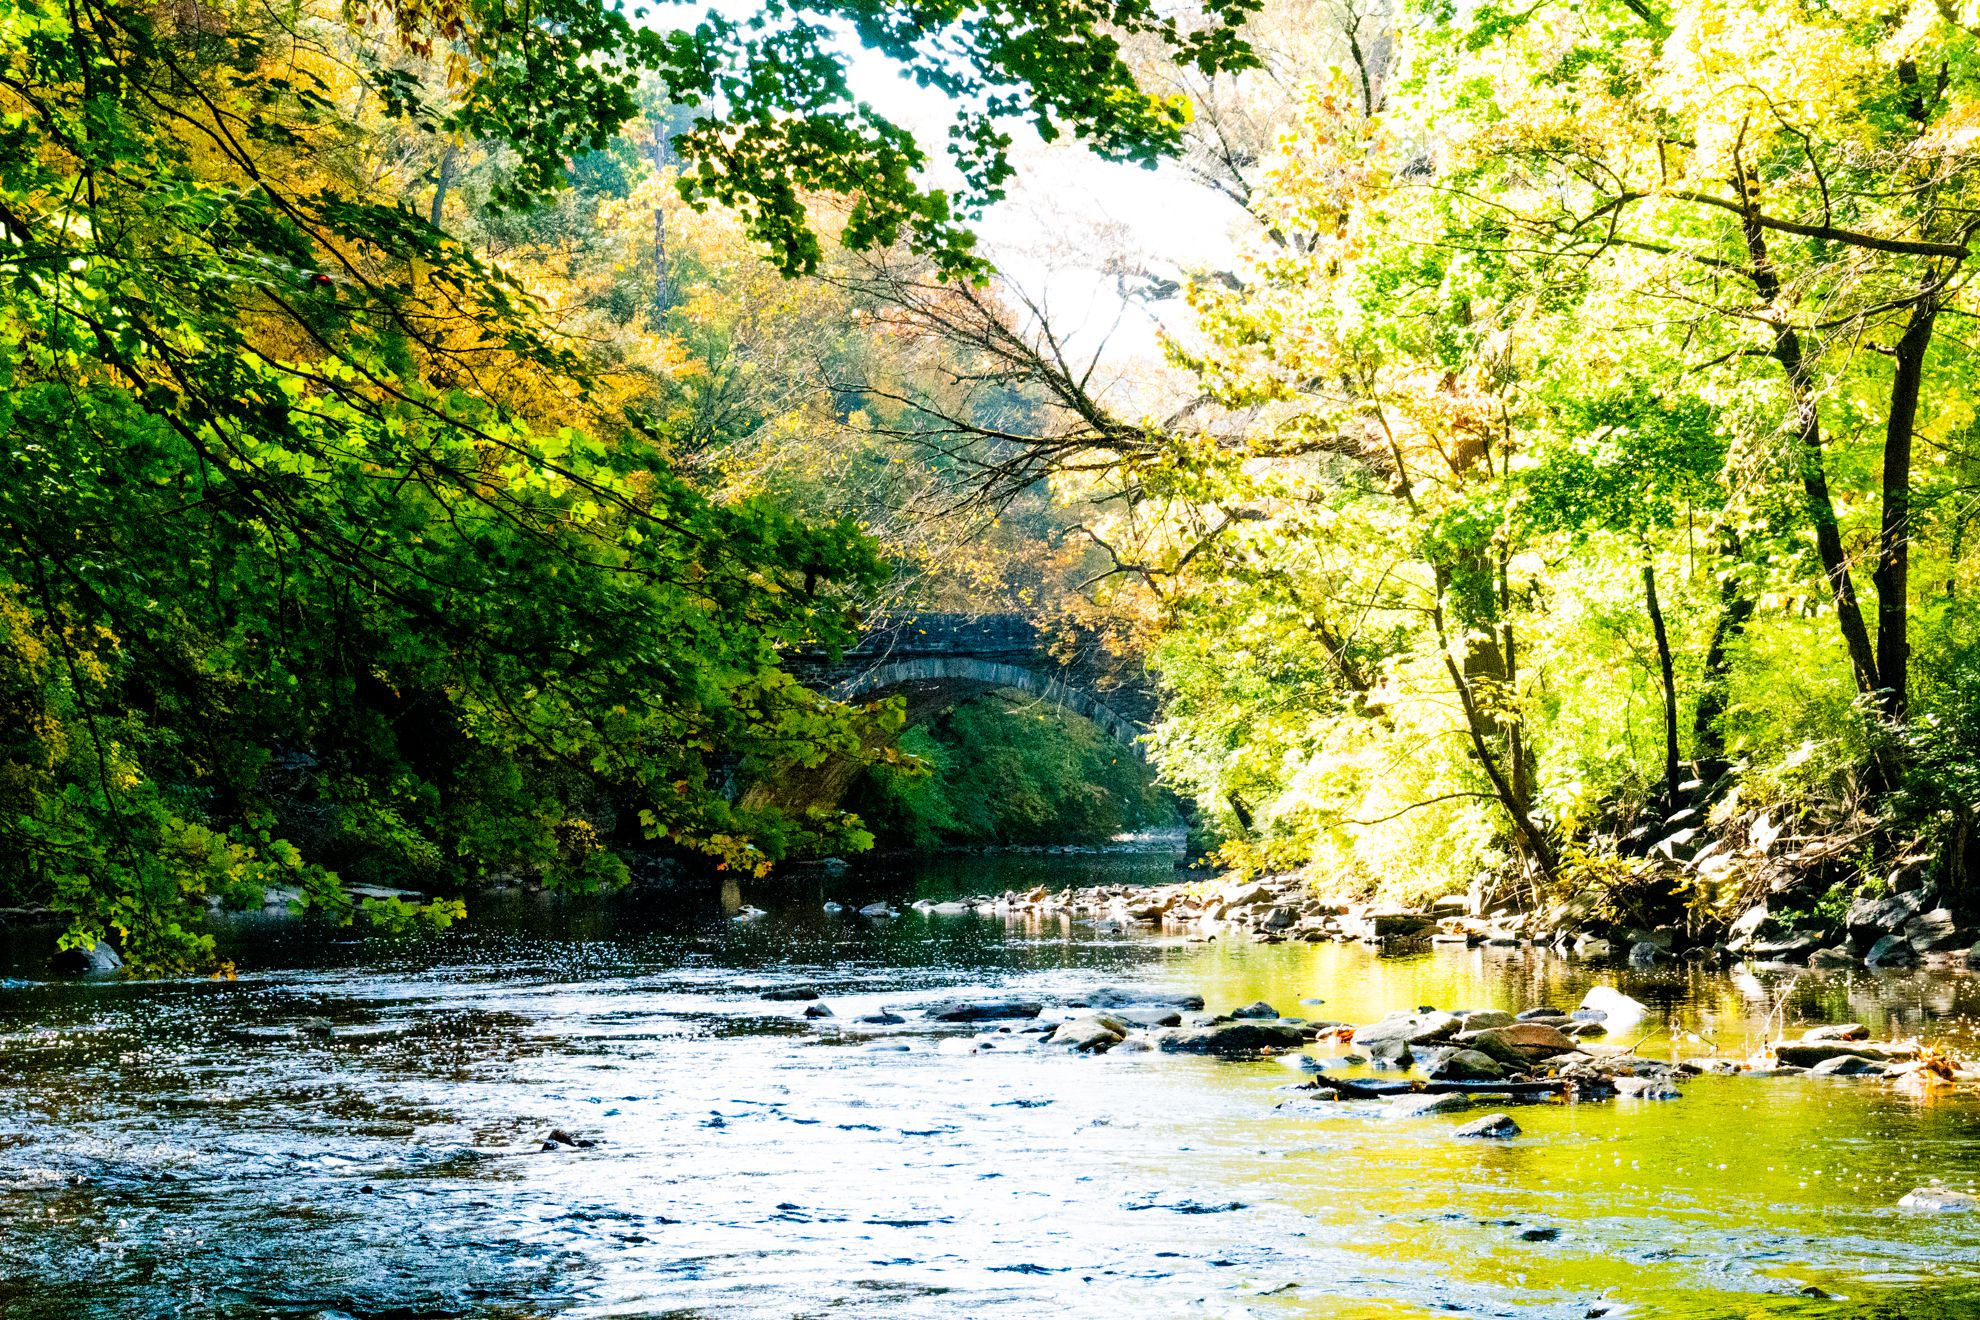 Wissahickon Valley Park as seen from the banks of the Wissahickon Creek in Philadelphia, Pennsylvania